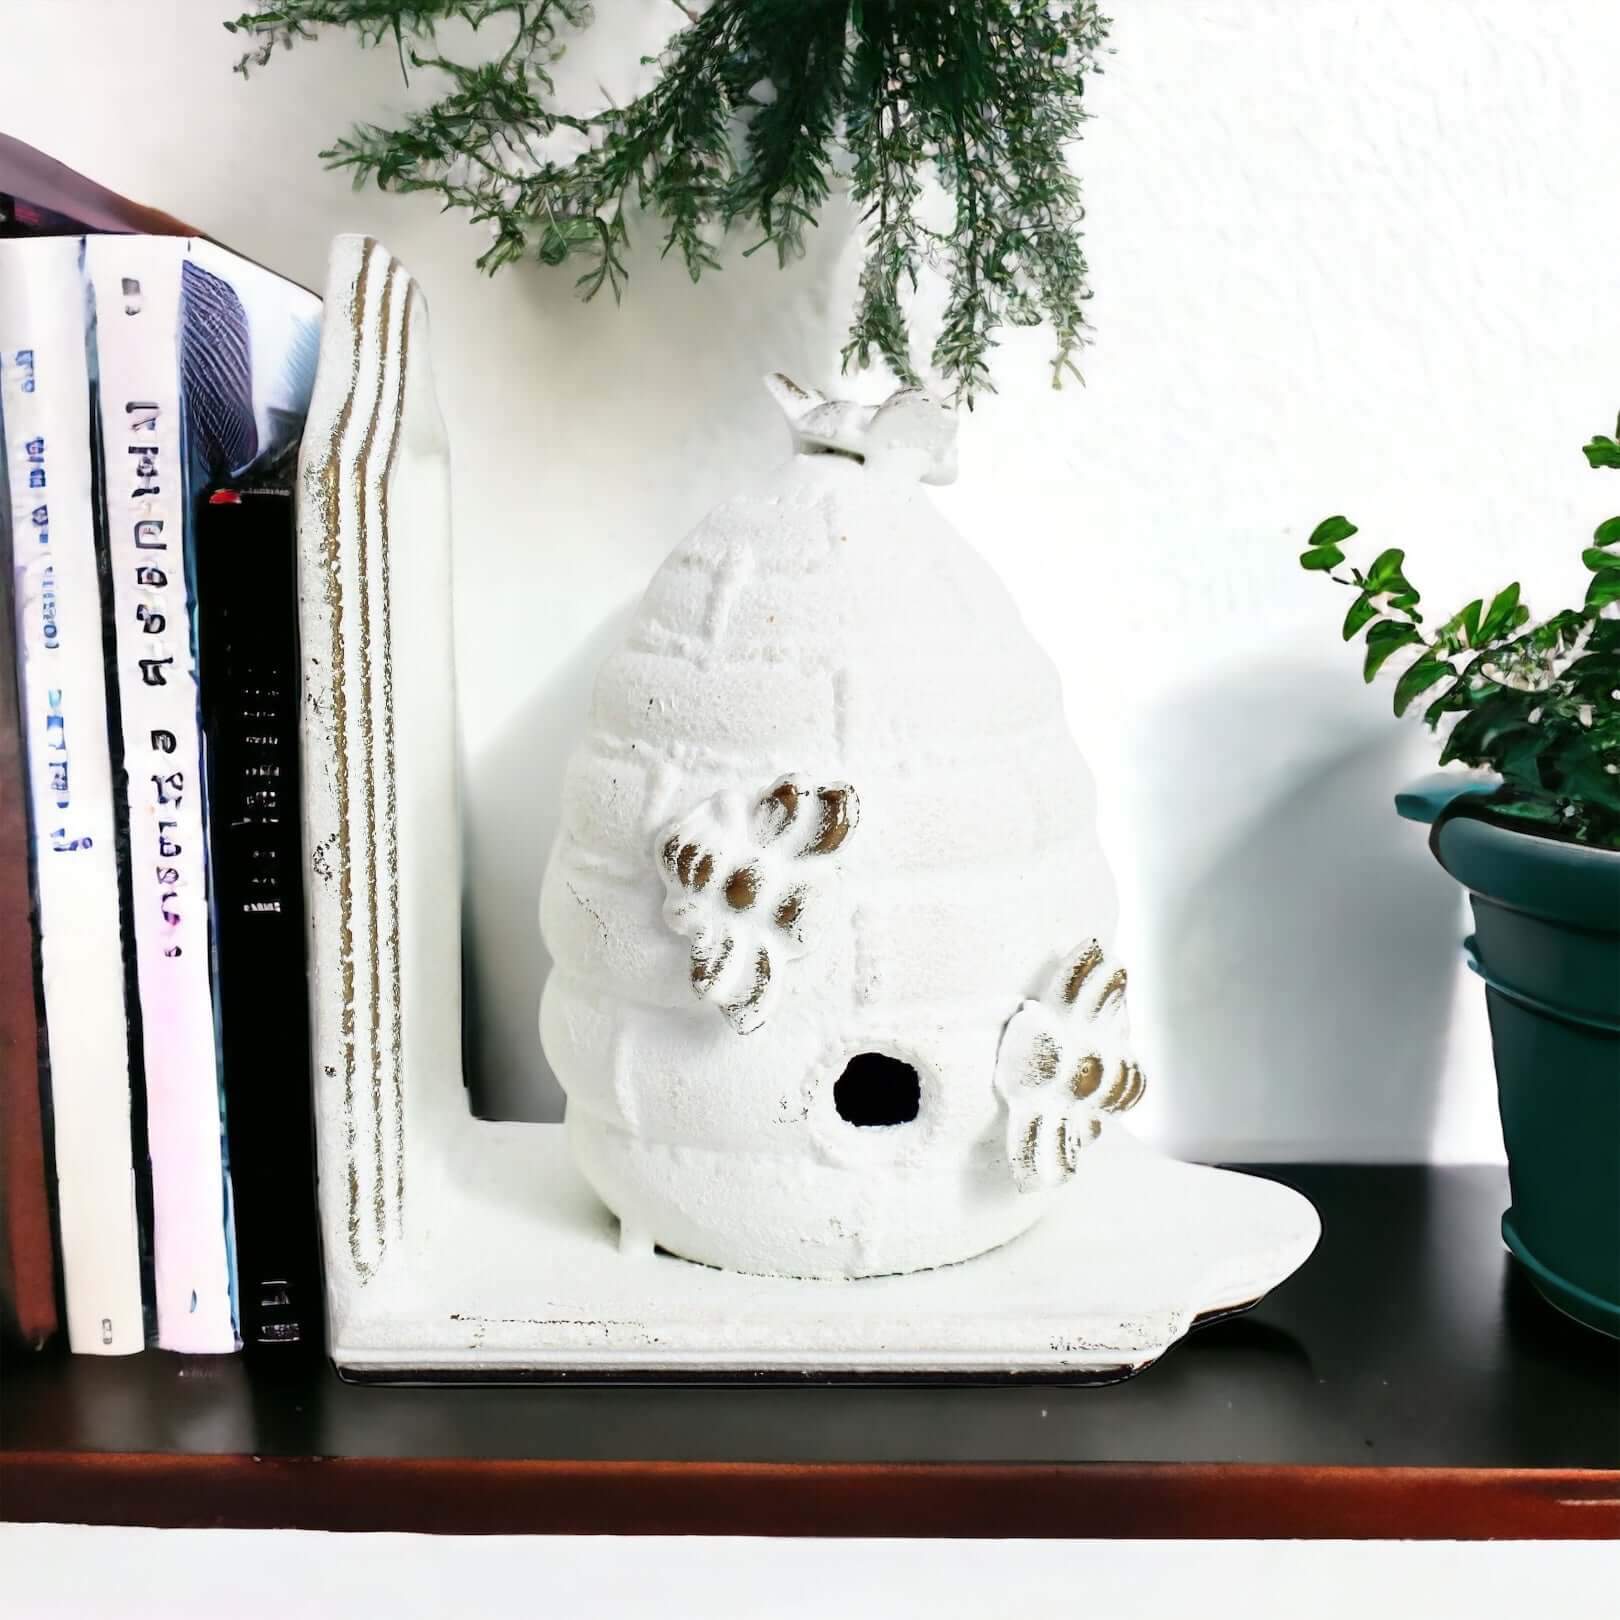 Book Ends Bookend Bee Hive Honey French - The Renmy Store Homewares & Gifts 